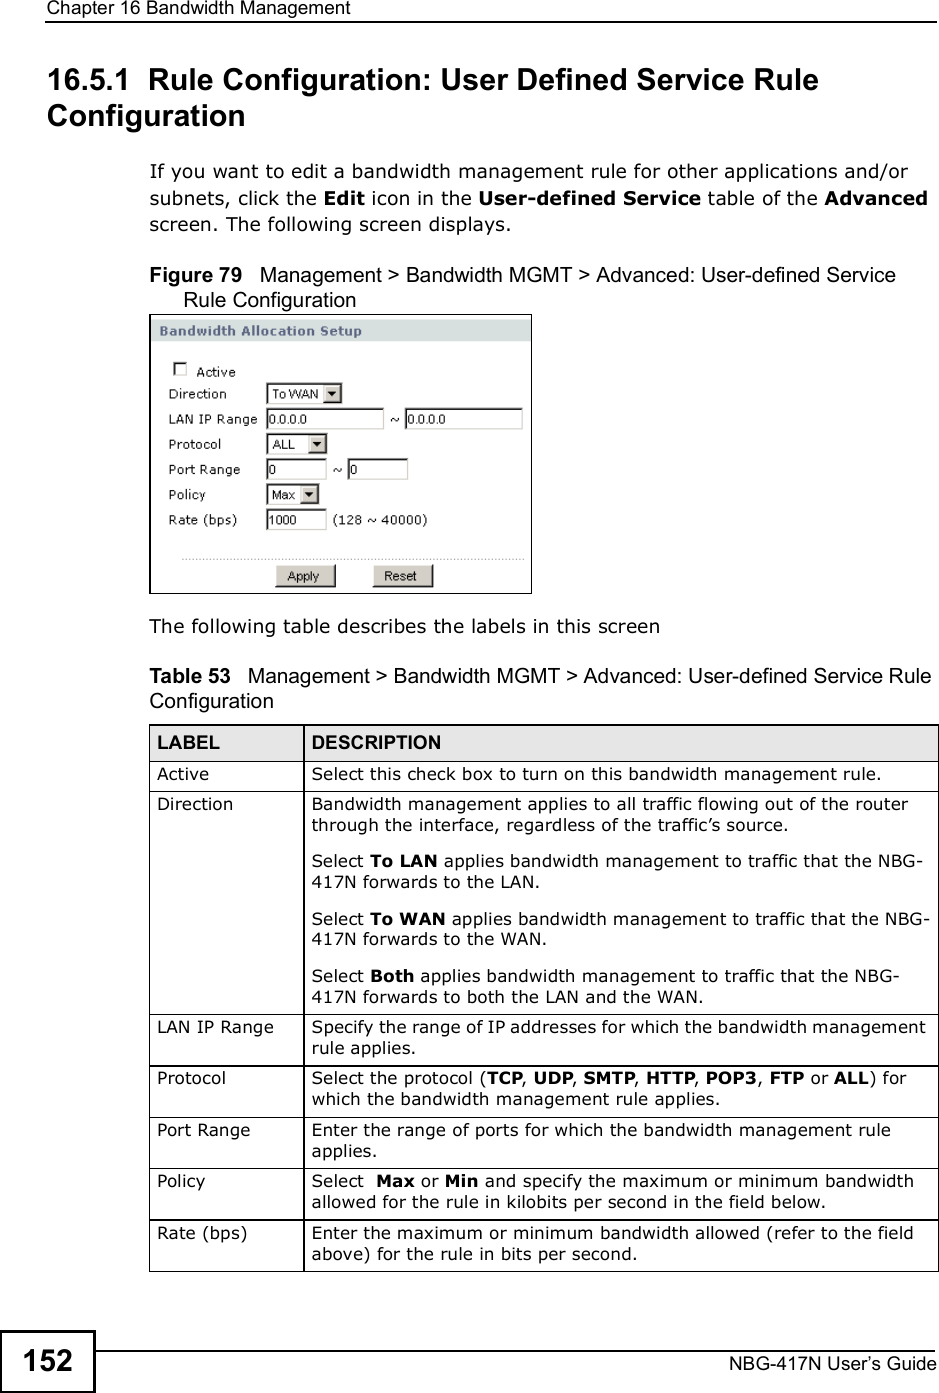 Chapter 16Bandwidth ManagementNBG-417N User s Guide15216.5.1  Rule Configuration: User Defined Service Rule Configuration    If you want to edit a bandwidth management rule for other applications and/or subnets, click the Edit icon in the User-defined Service table of the Advanced screen. The following screen displays.Figure 79   Management &gt; Bandwidth MGMT &gt; Advanced: User-defined Service Rule Configuration The following table describes the labels in this screenTable 53   Management &gt; Bandwidth MGMT &gt; Advanced: User-defined Service Rule Configuration  LABEL DESCRIPTIONActive Select this check box to turn on this bandwidth management rule.Direction  Bandwidth management applies to all traffic flowing out of the router through the interface, regardless of the traffic!s source.Select To LAN applies bandwidth management to traffic that the NBG-417N forwards to the LAN. Select To WAN applies bandwidth management to traffic that the NBG-417N forwards to the WAN. Select Both applies bandwidth management to traffic that the NBG-417N forwards to both the LAN and the WAN. LAN IP Range Specify the range of IP addresses for which the bandwidth management rule applies. Protocol Select the protocol (TCP, UDP, SMTP, HTTP, POP3, FTP or ALL) for which the bandwidth management rule applies. Port Range Enter the range of ports for which the bandwidth management rule applies.Policy Select  Max or Min and specify the maximum or minimum bandwidth allowed for the rule in kilobits per second in the field below. Rate (bps) Enter the maximum or minimum bandwidth allowed (refer to the field above) for the rule in bits per second.